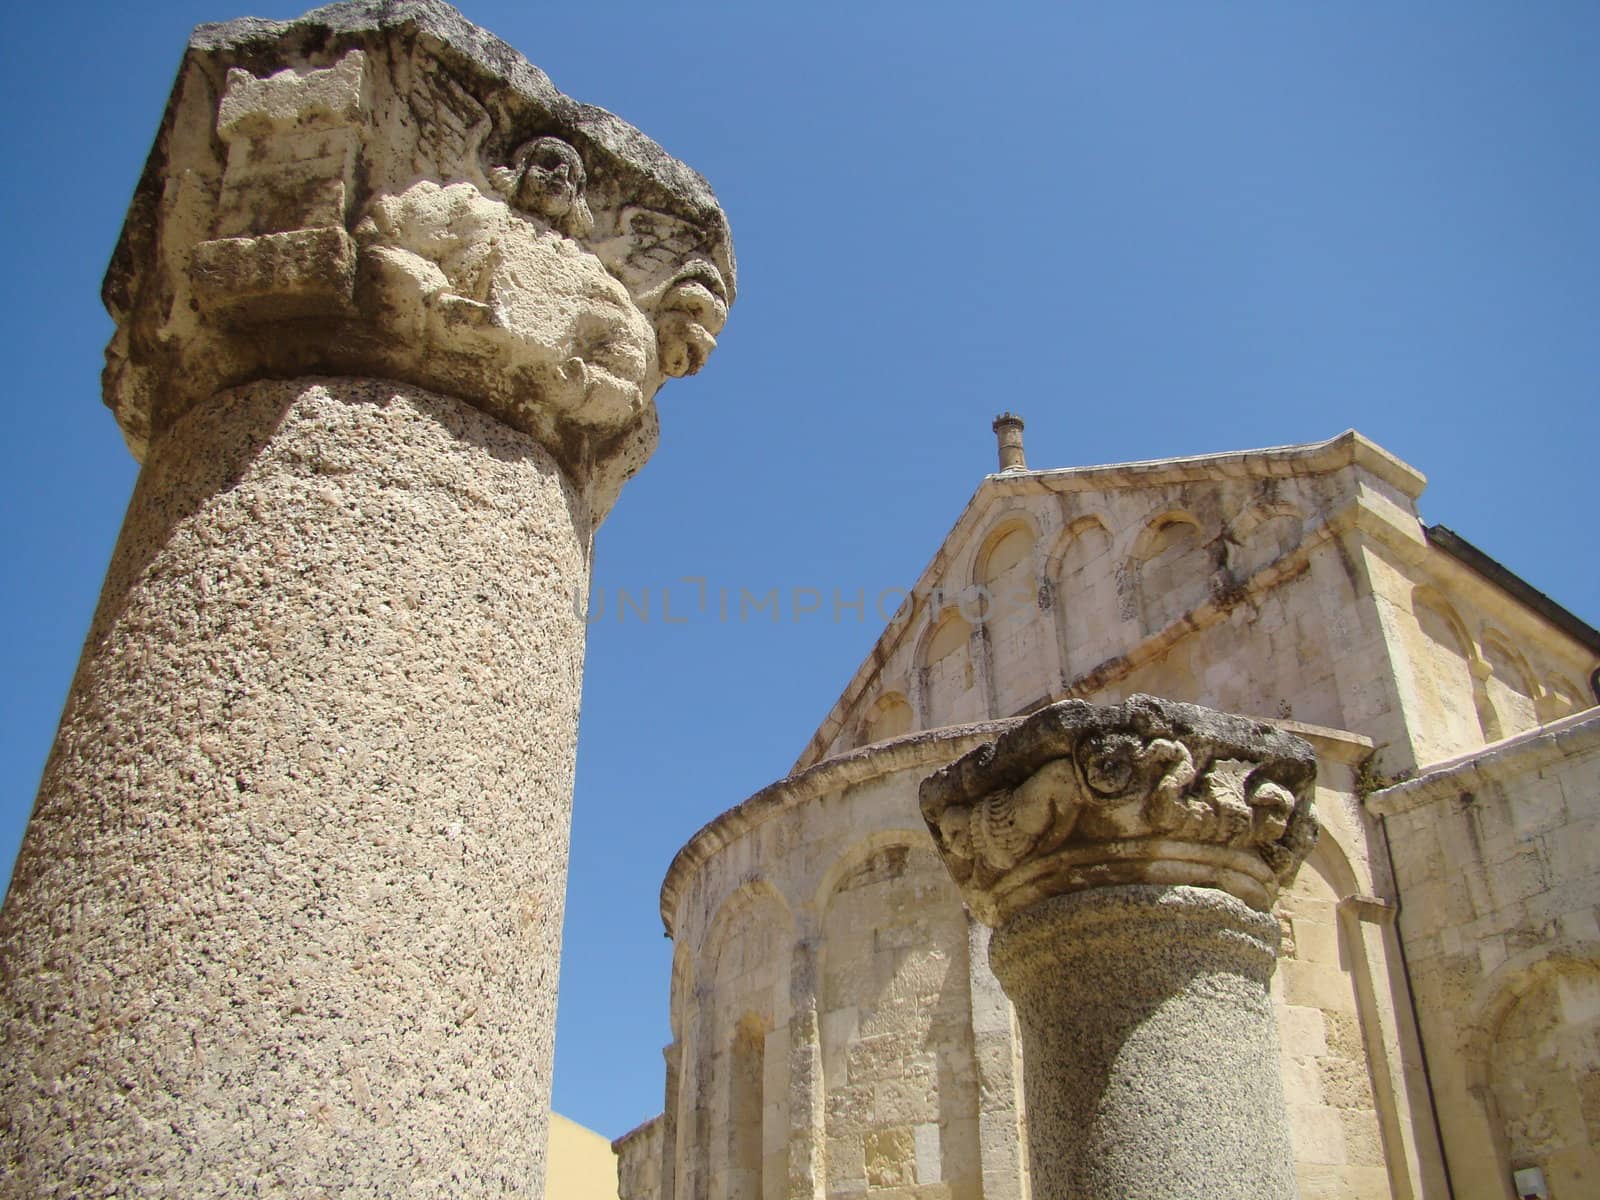 roman pillar in fron of the 11th-century, three-naved Basilica of San Gavino, which was built using only precious hardstones like marble, porphyry and granite, is the largest Romanesque church in Sardinia.